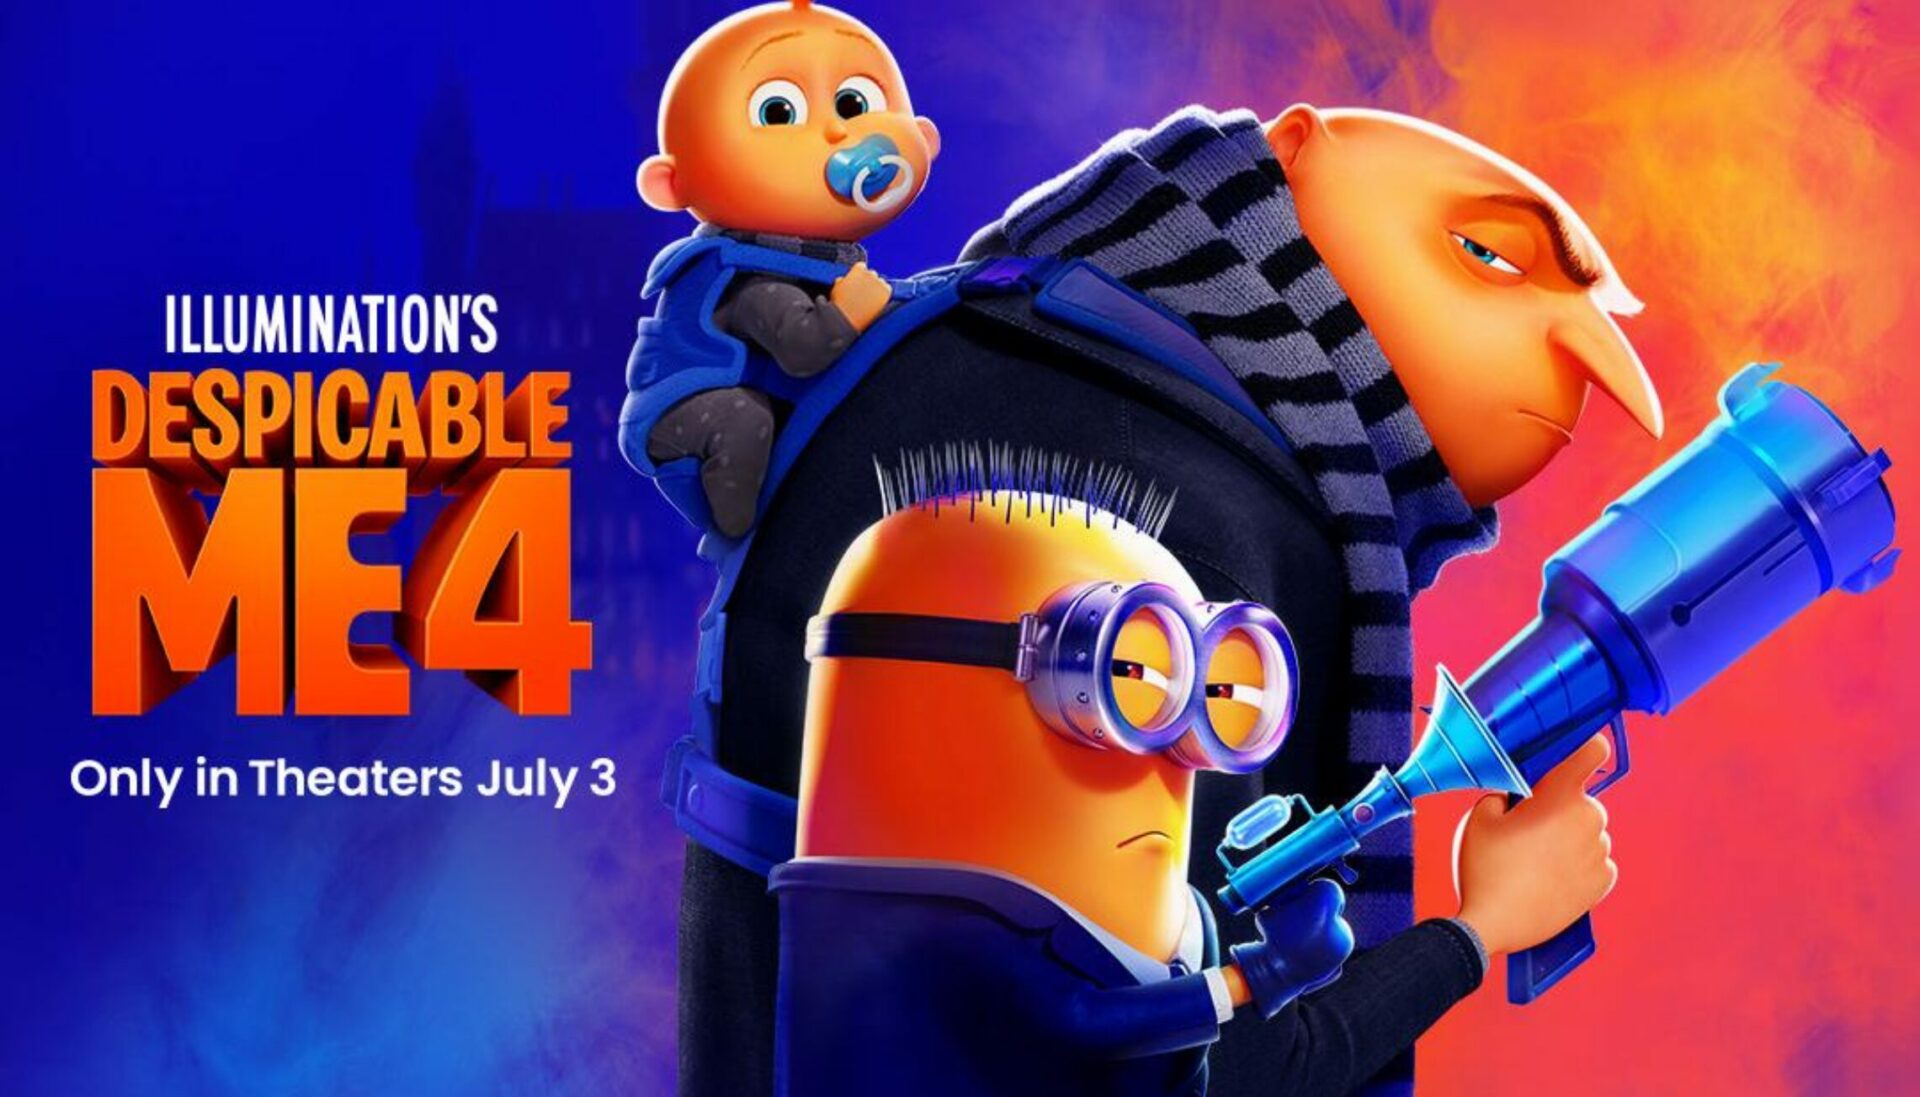 Despicable Me 4 – film (U) at The Courtyard